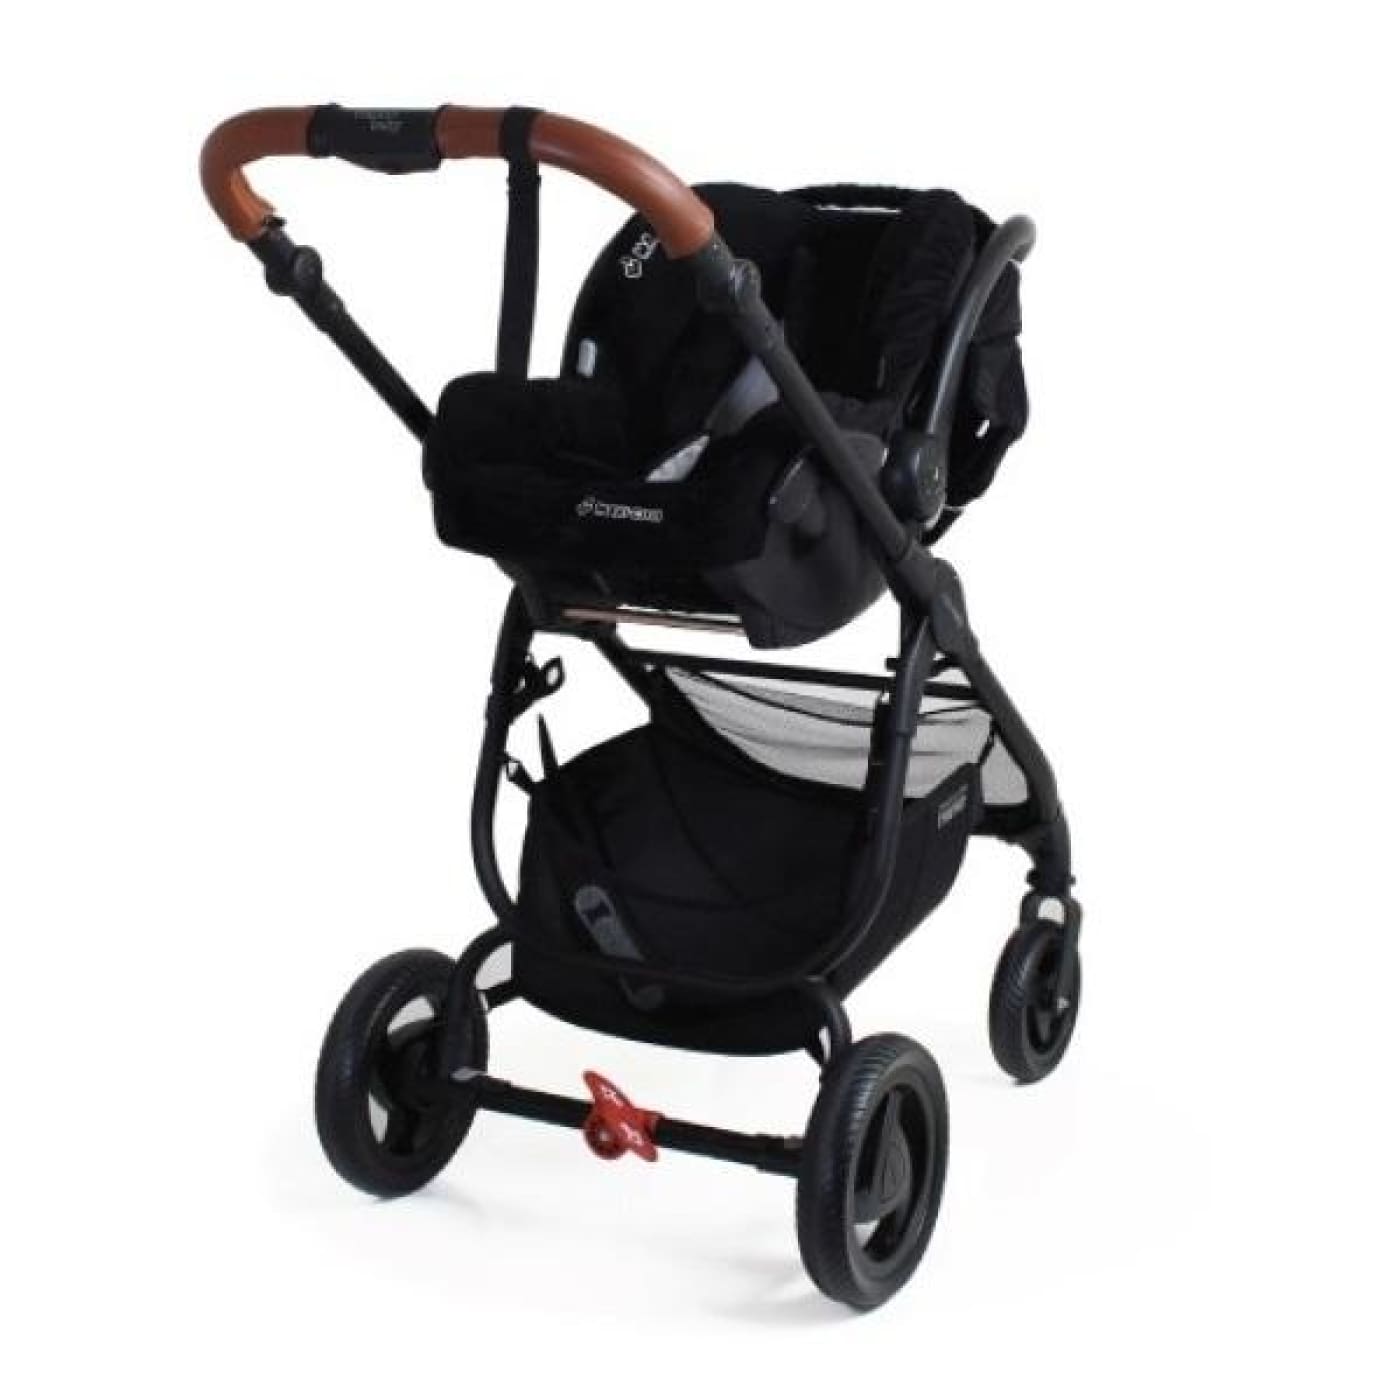 Valco Baby Maxi Cosi Adaptor for Ultra Trend - PRAMS & STROLLERS - ADAPTORS FOR TRAV SYS